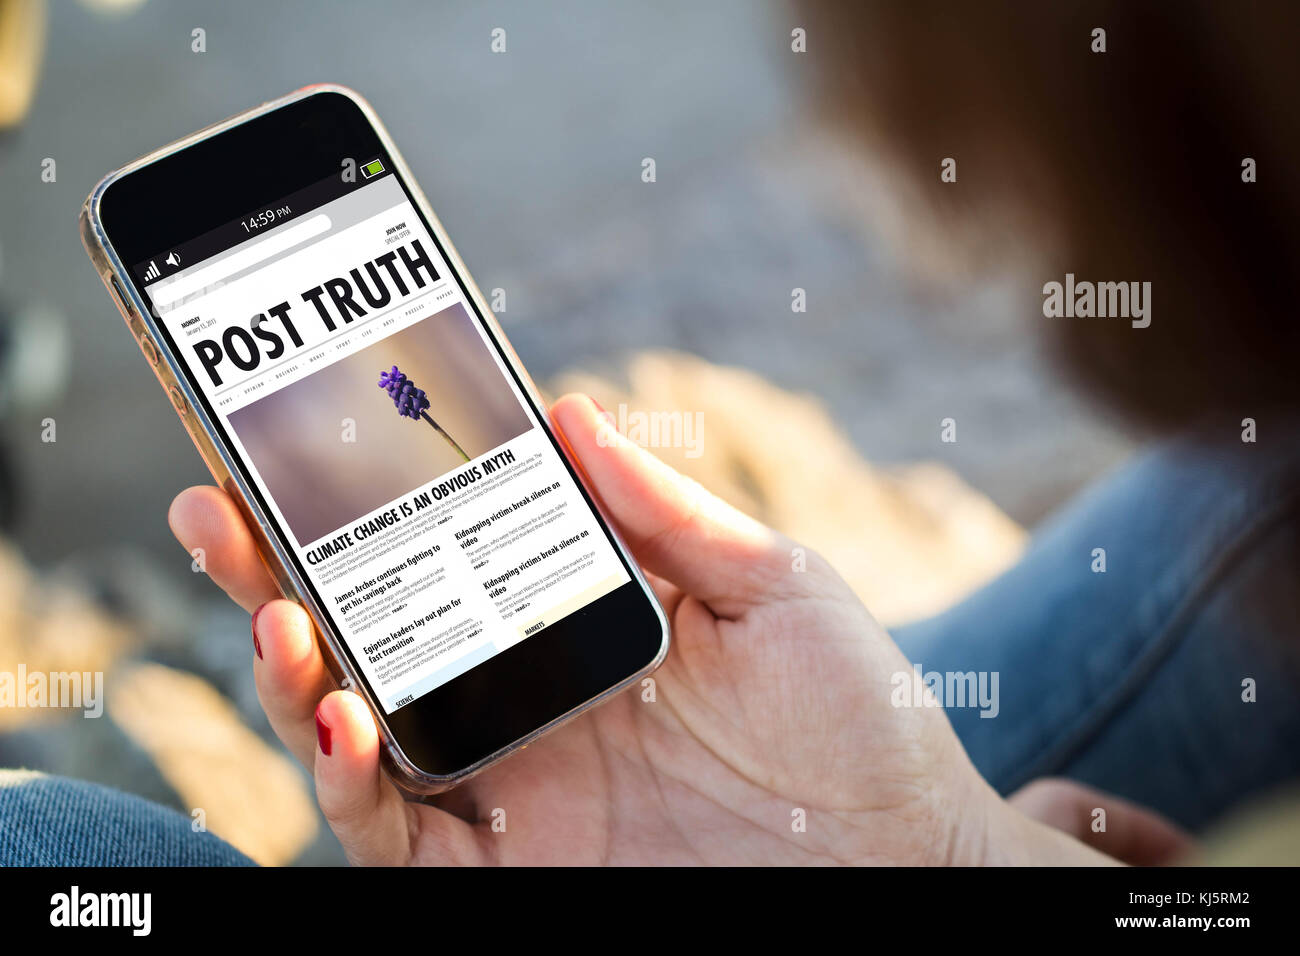 close-up view of young woman checking post truth news her mobile phone. All screen graphics are made up. Stock Photo